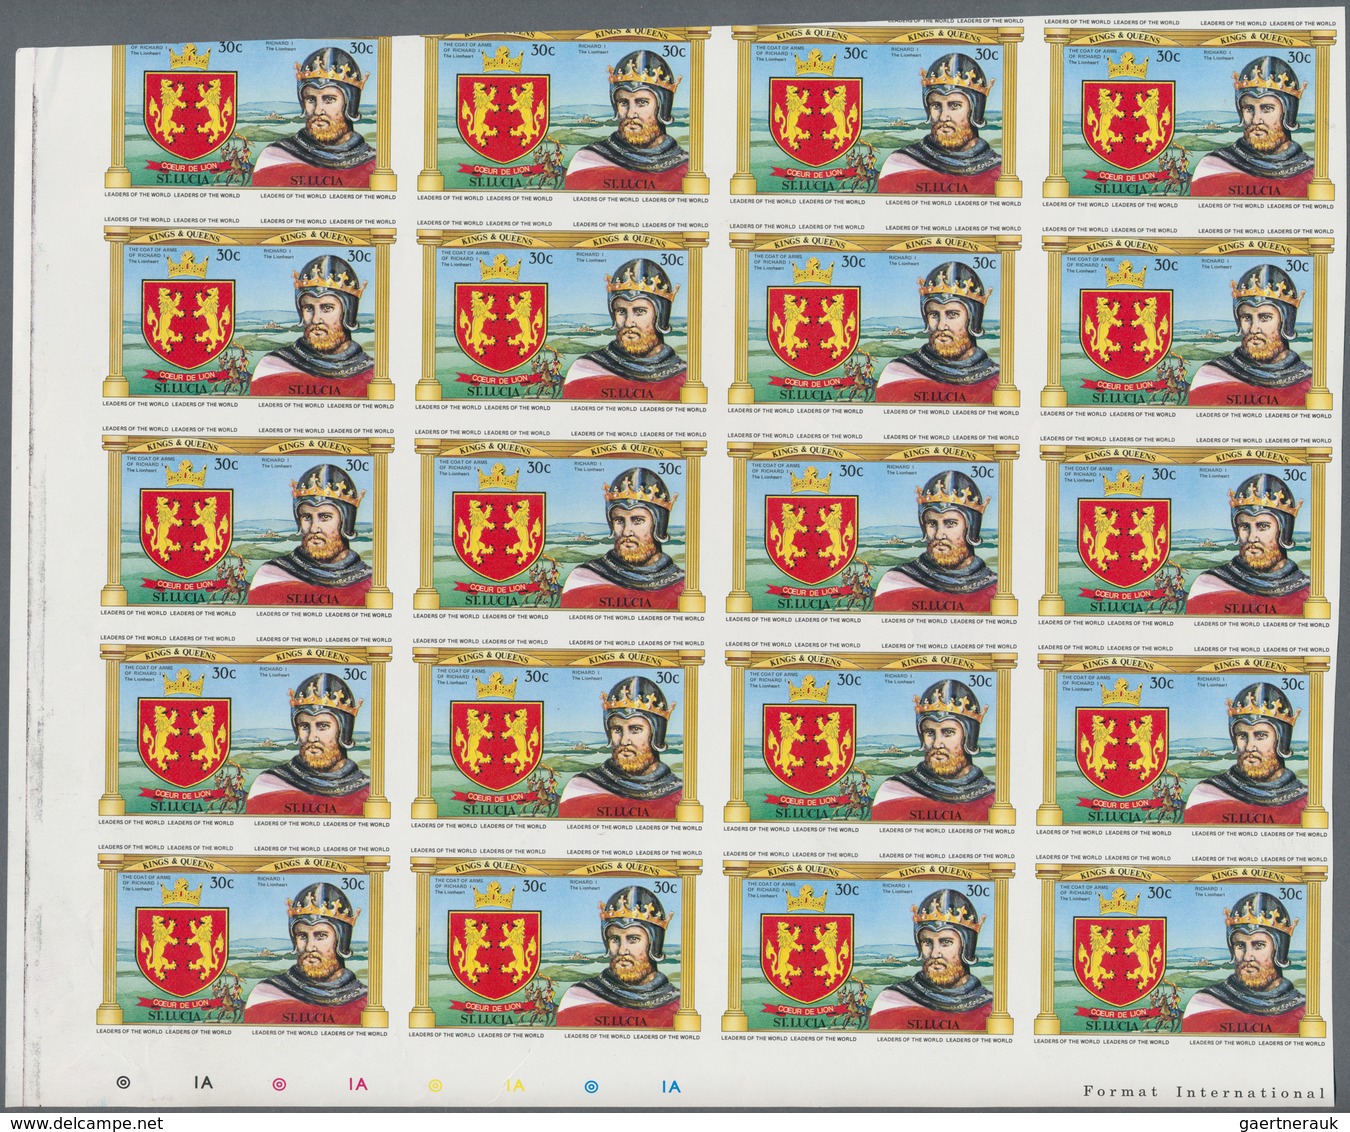 Thematische Philatelie: 1983/1986, St. Lucia. Large stock of imperforate proof progressive stamps an